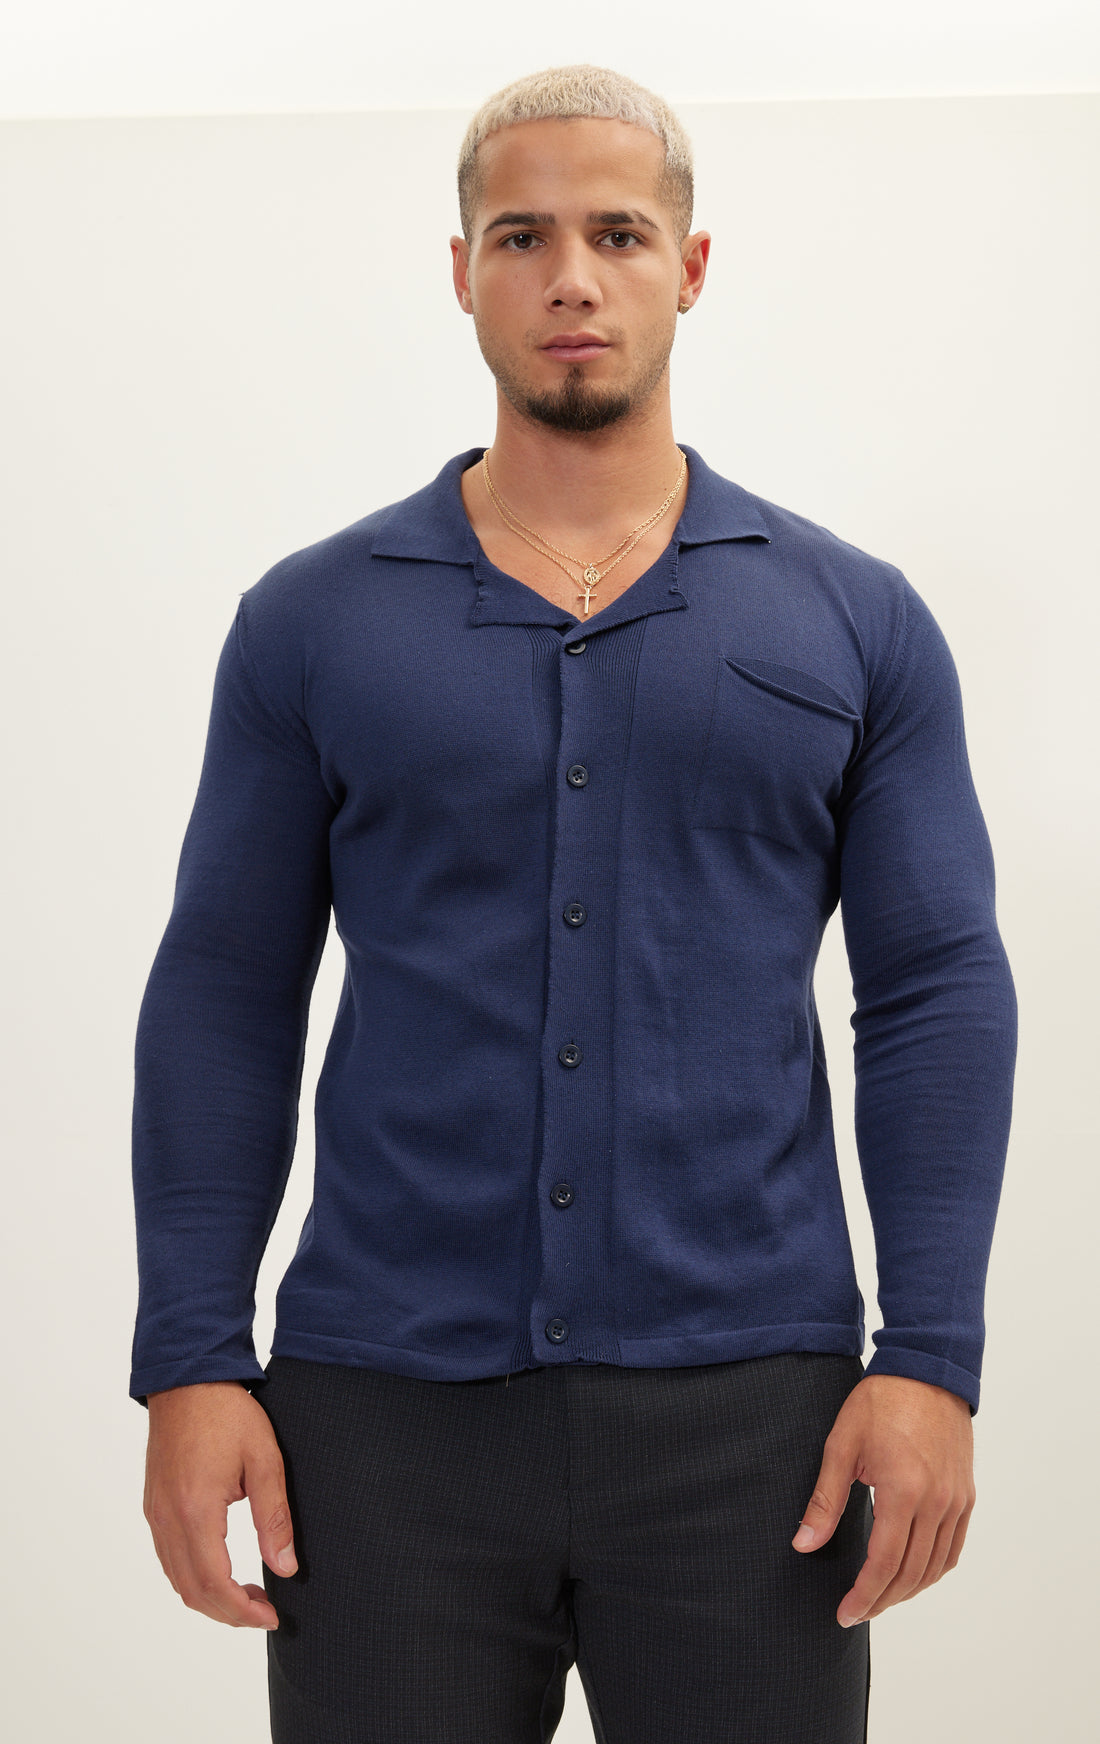 N° 6403 LONG SLEEVE KNIT BUTTON DOWN - NAVY